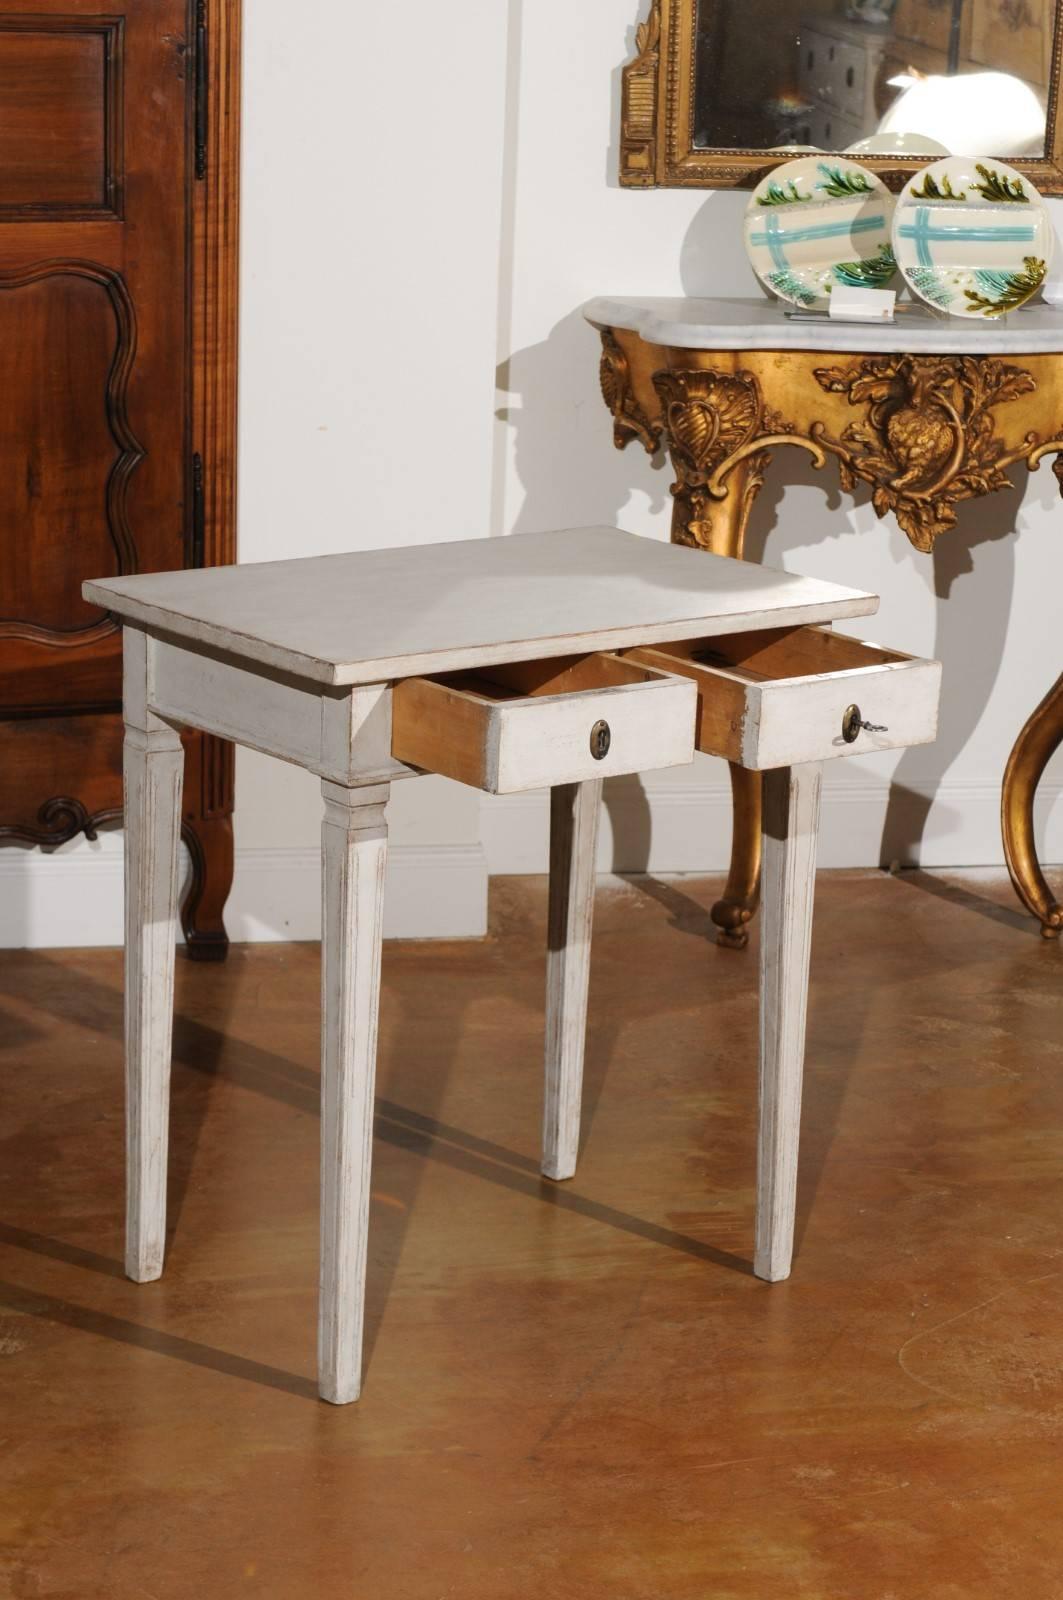 Wood Swedish 1860s Gustavian Style Painted Side Table with Drawers and Tapered Legs